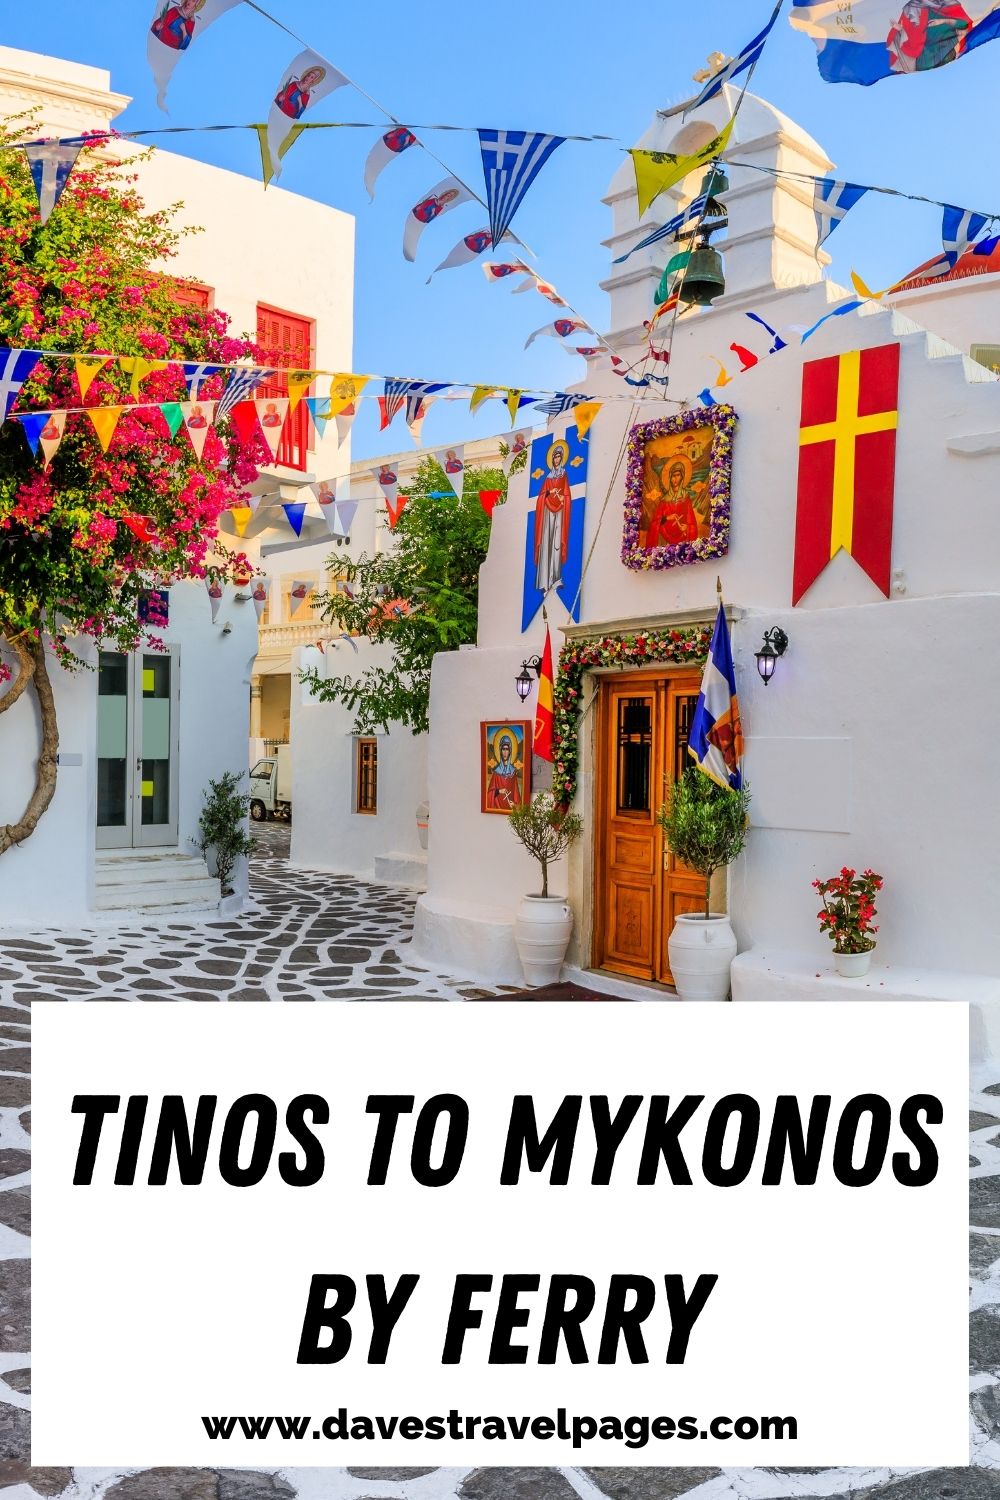 Ferries from tinos to mykonos